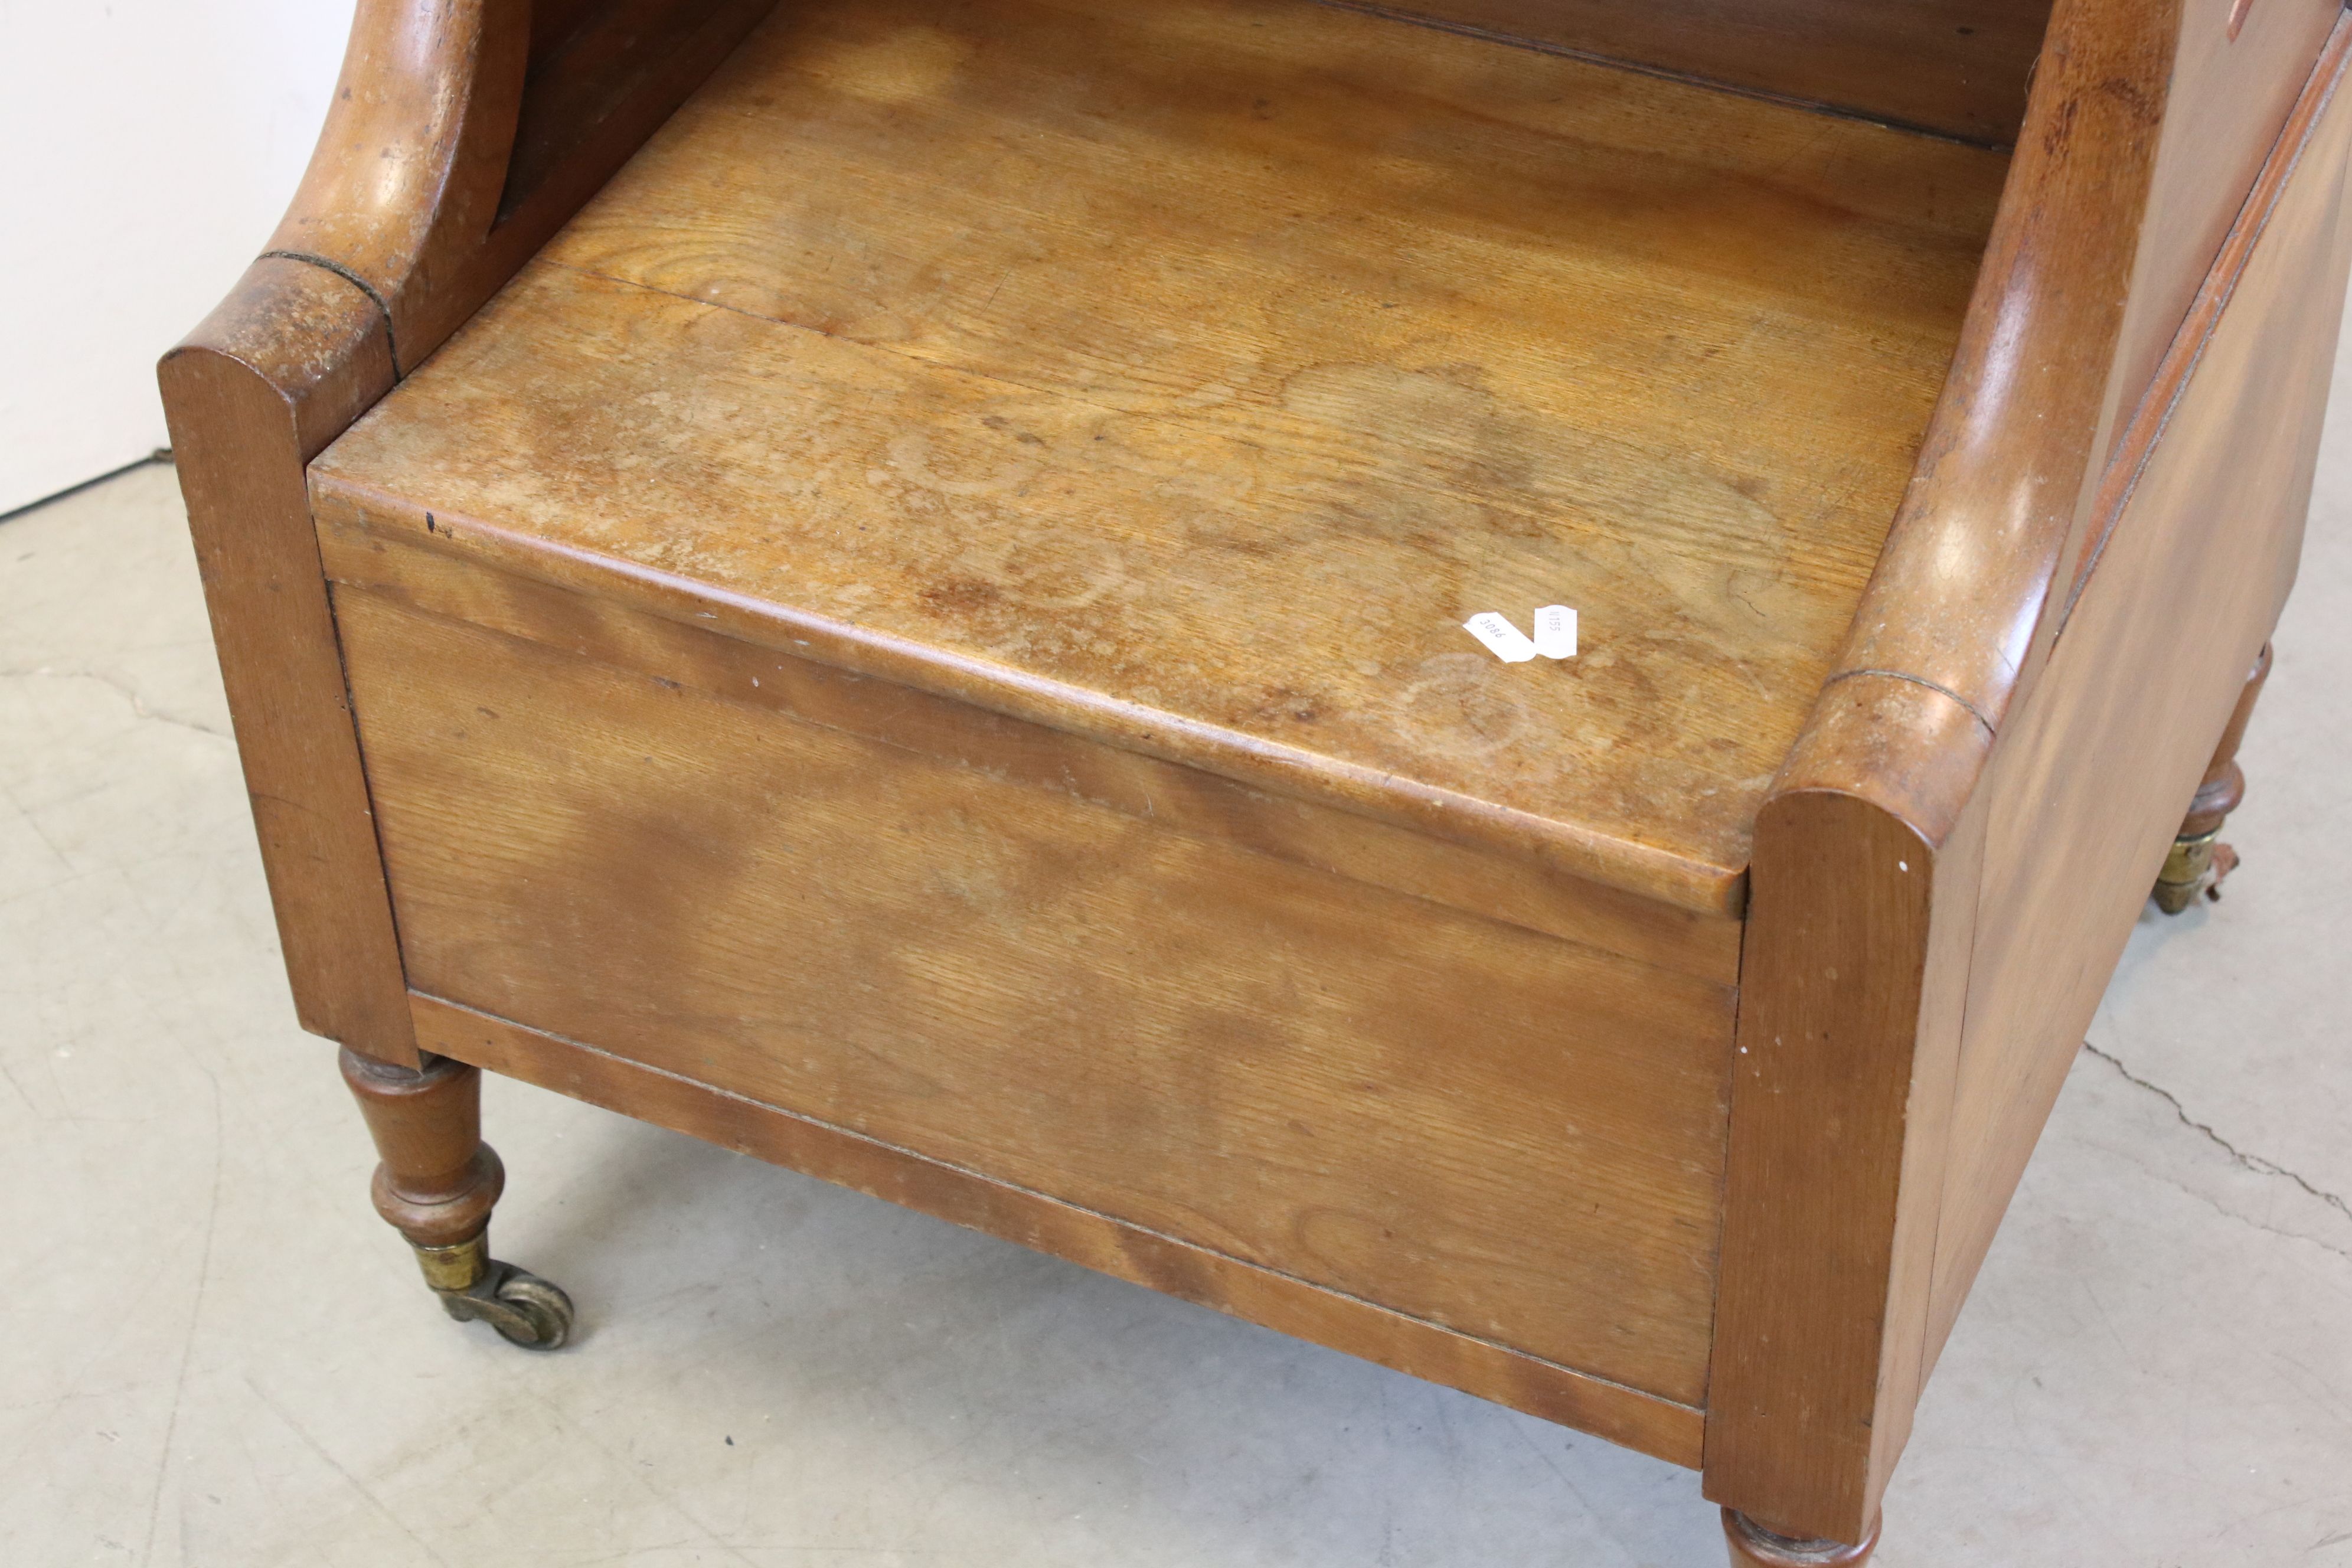 Victorian Walnut Box Seat Commode, with hinged lid above a hinged seat, raised on a turned legs with - Image 2 of 6